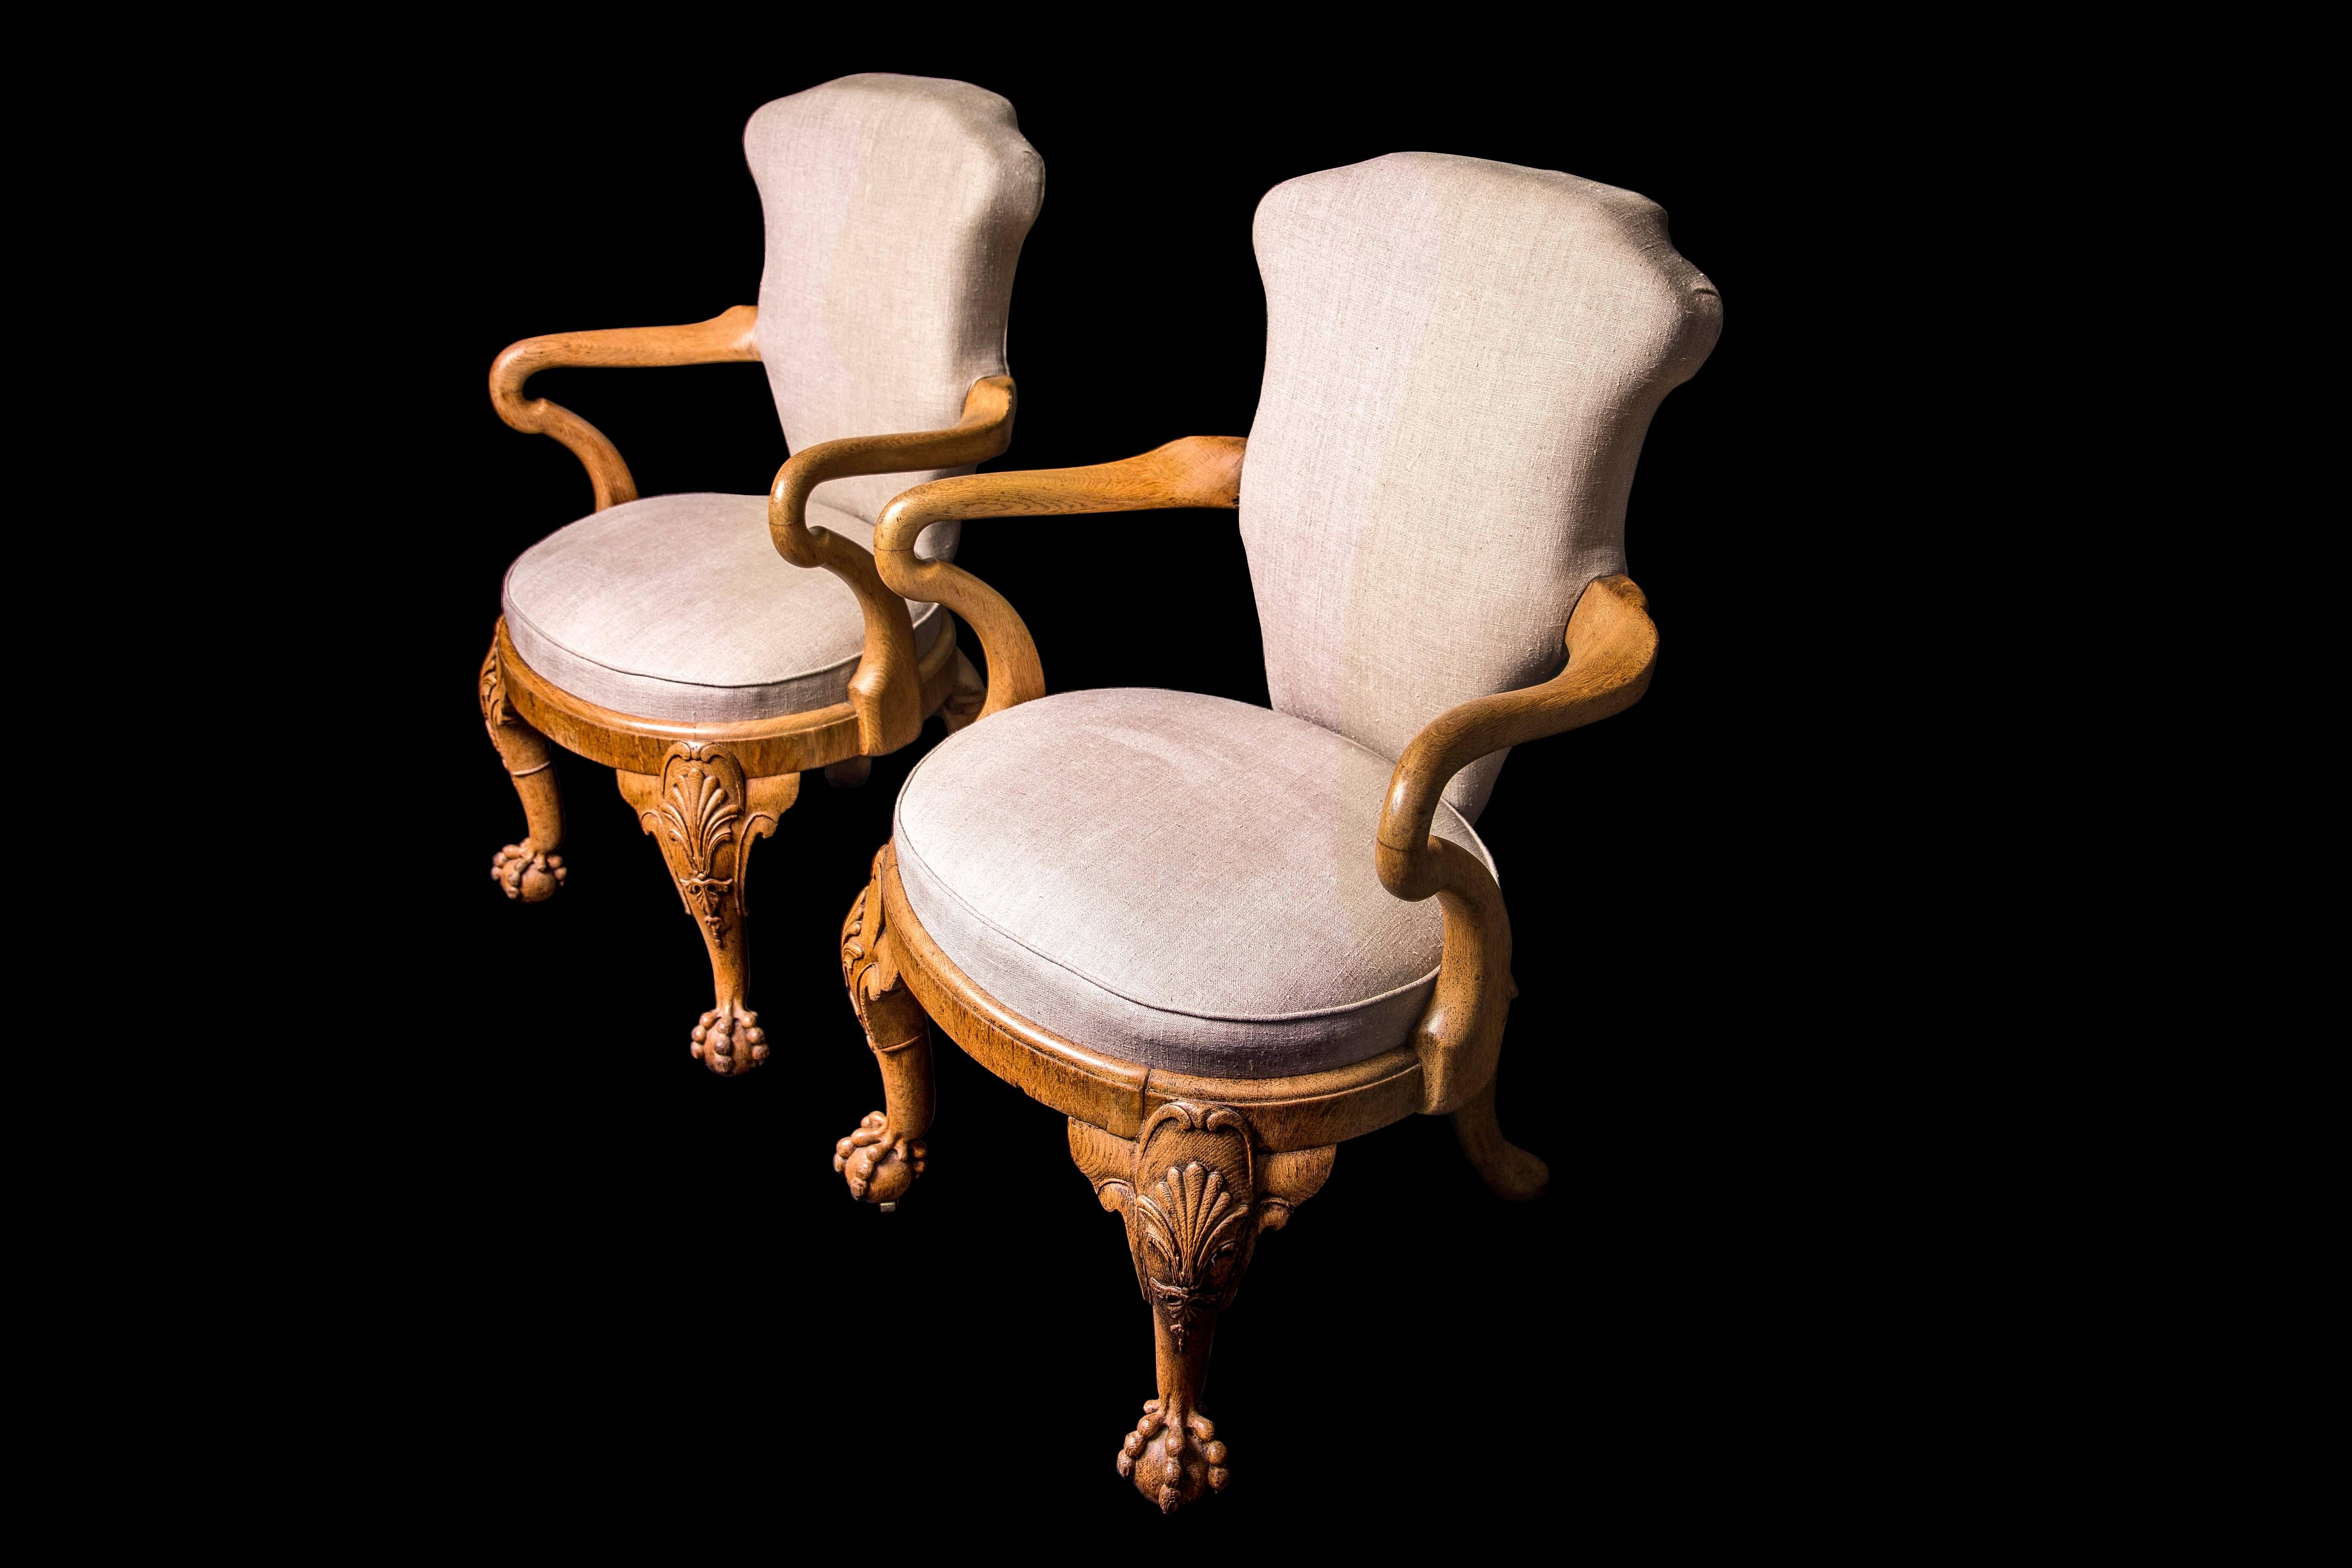 In the George II style, circa 1827, each with shepherd's crook arm supports, on scroll, shell and bellflower pendant carved cabriole front legs terminating in claw and ball feet, with splayed back legs, on recessed brass castors, one chair stamped: